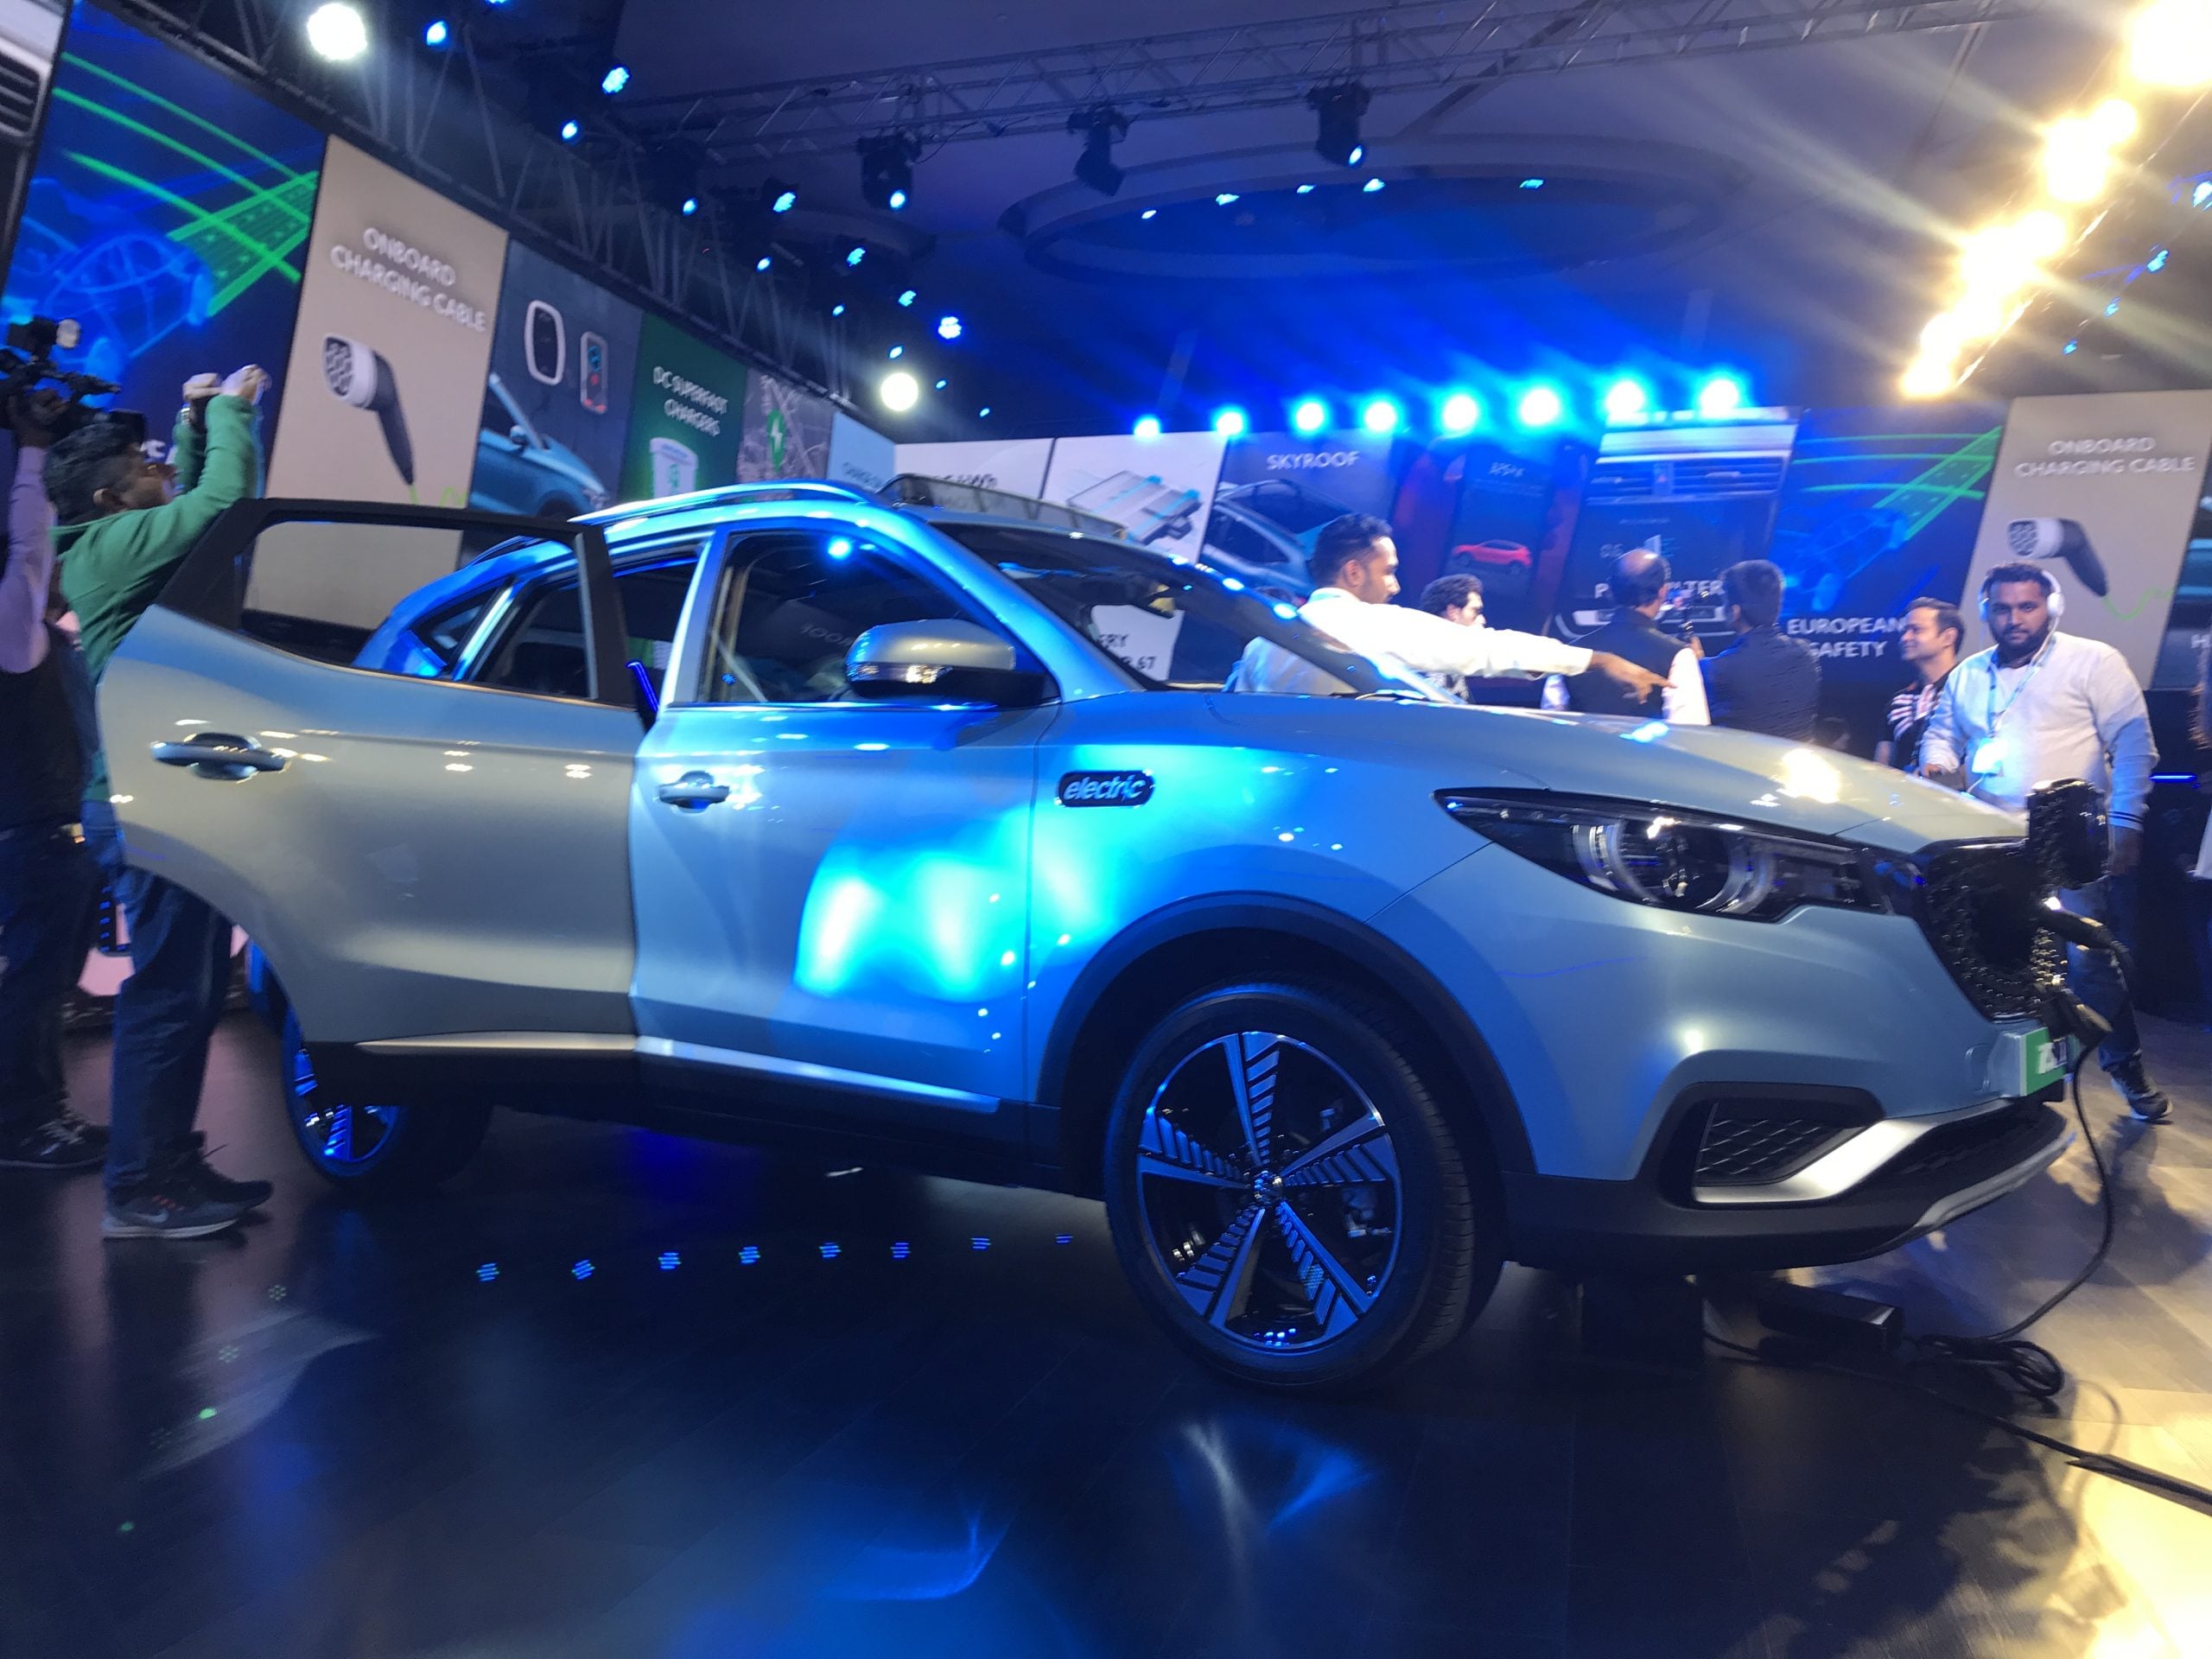 MG ZS EV Features